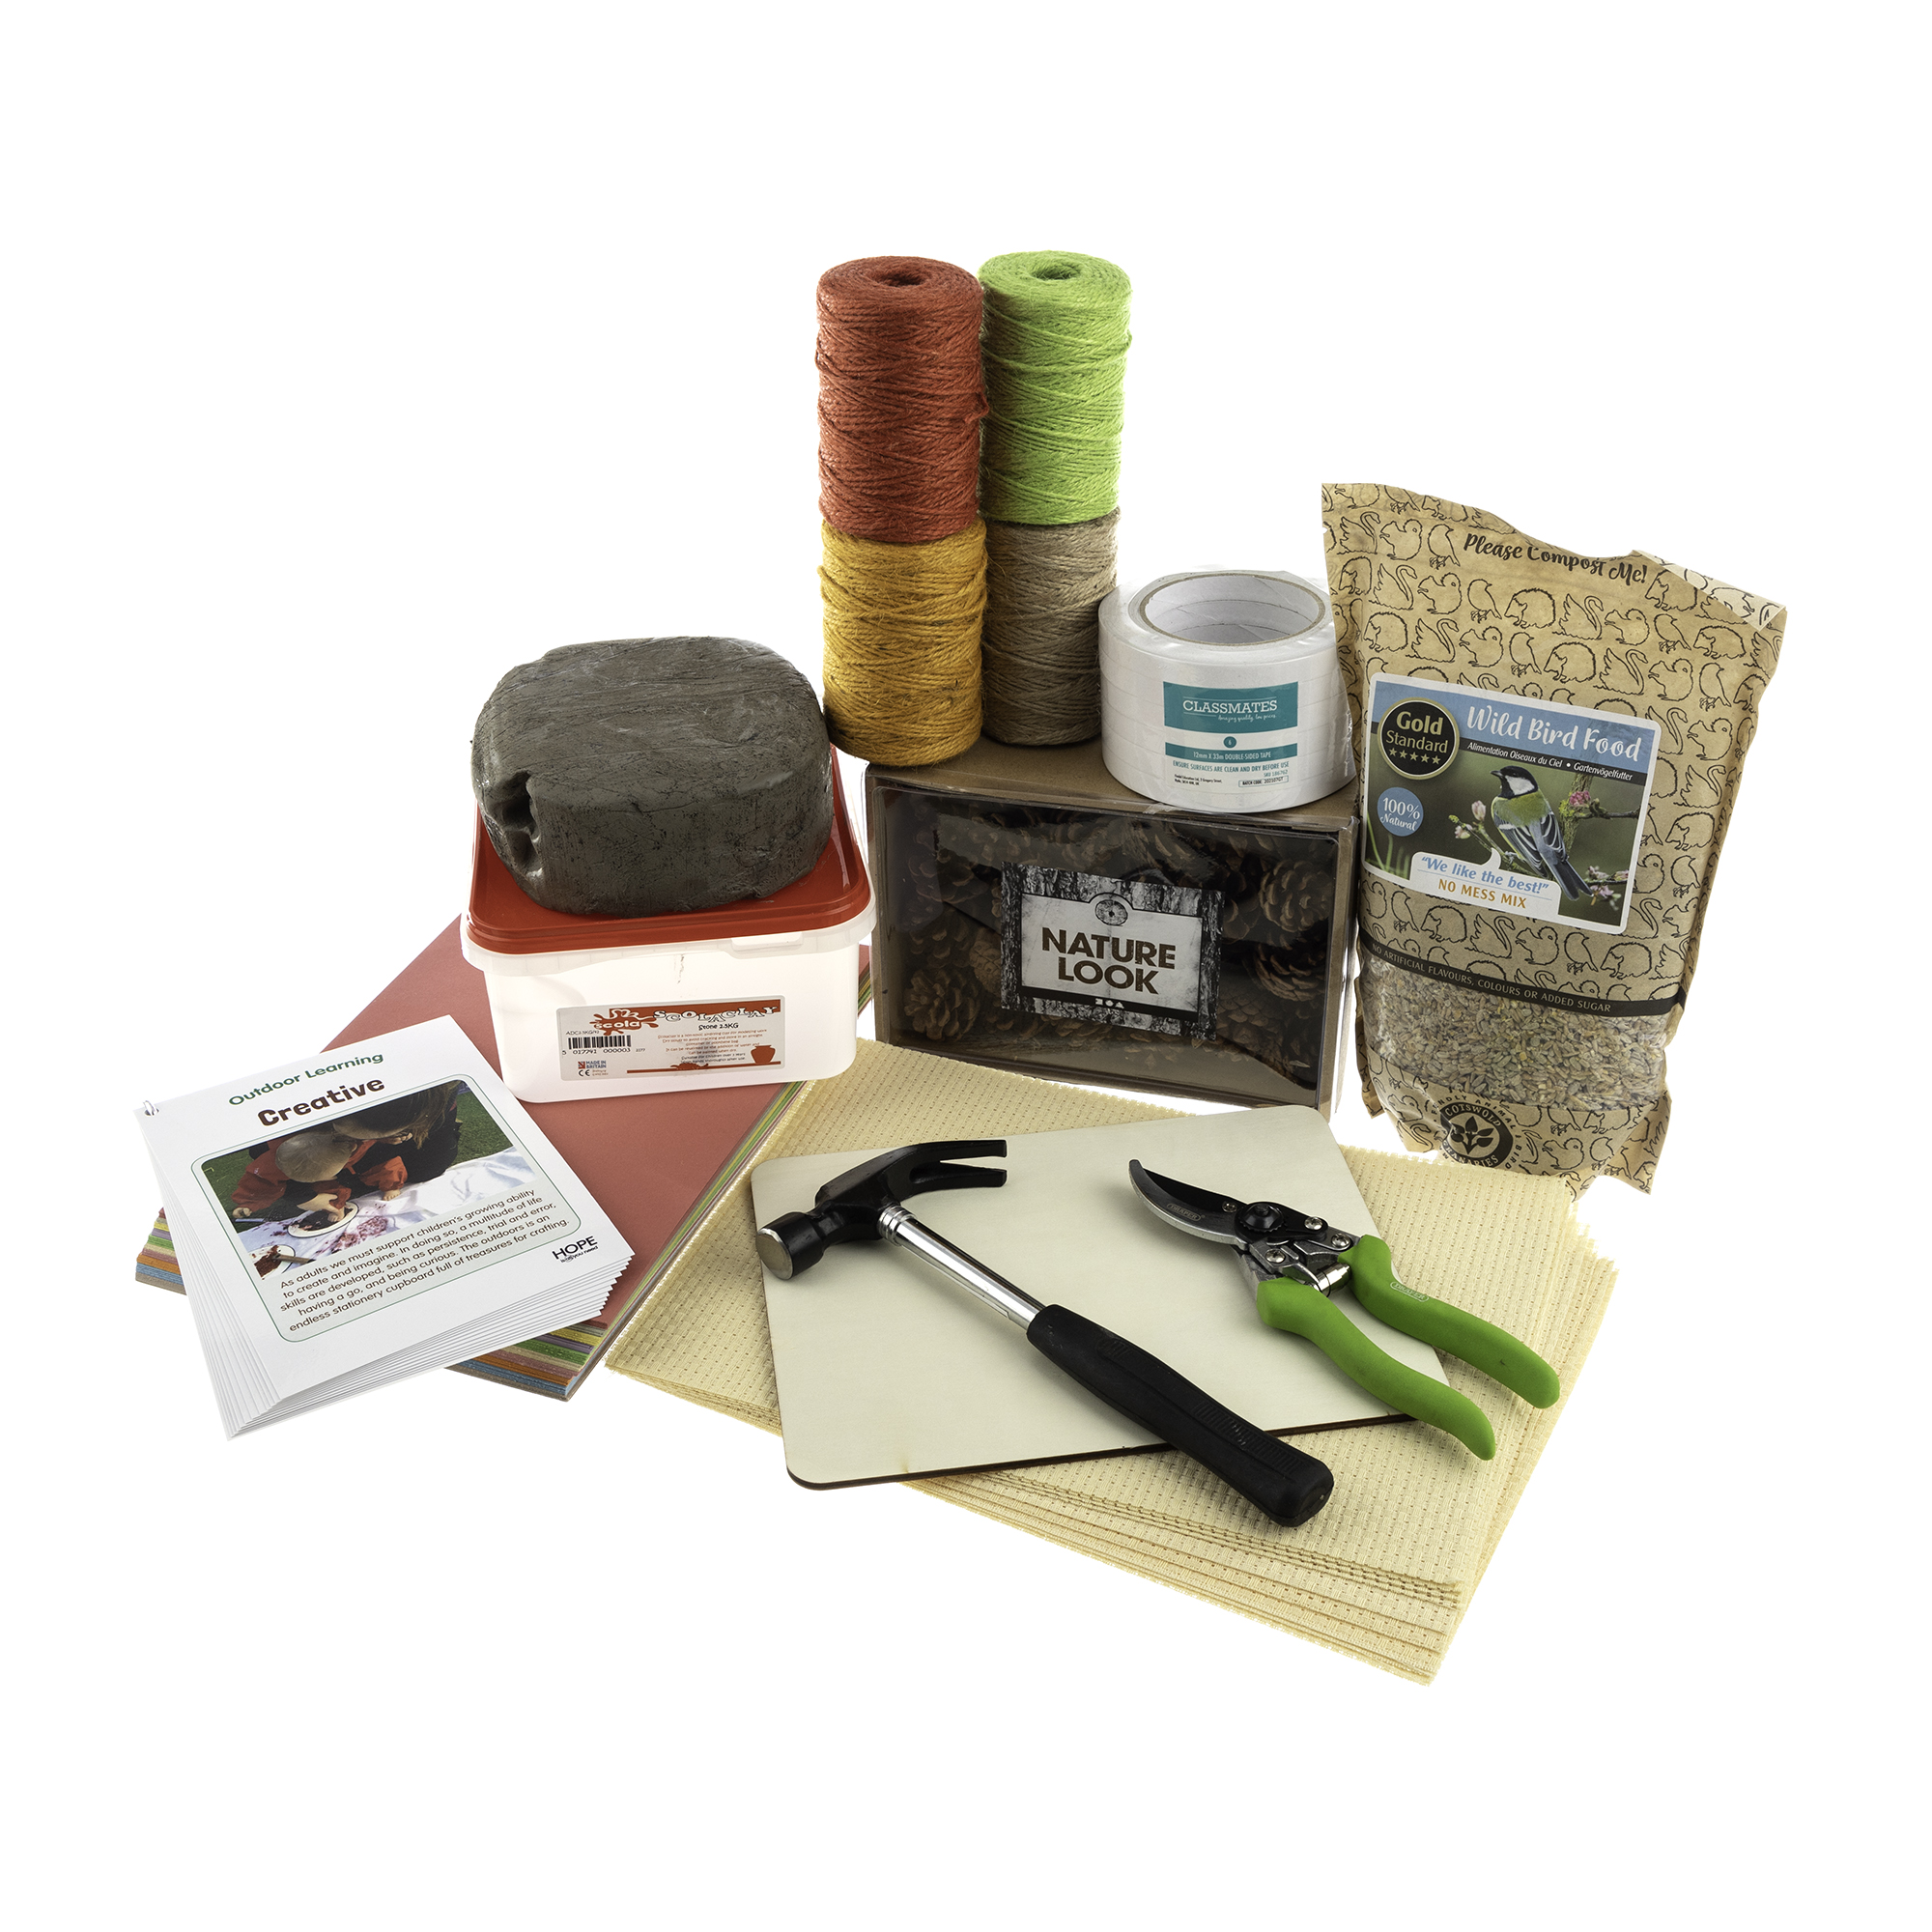 Outdoor Learning Creative Kit from Hope